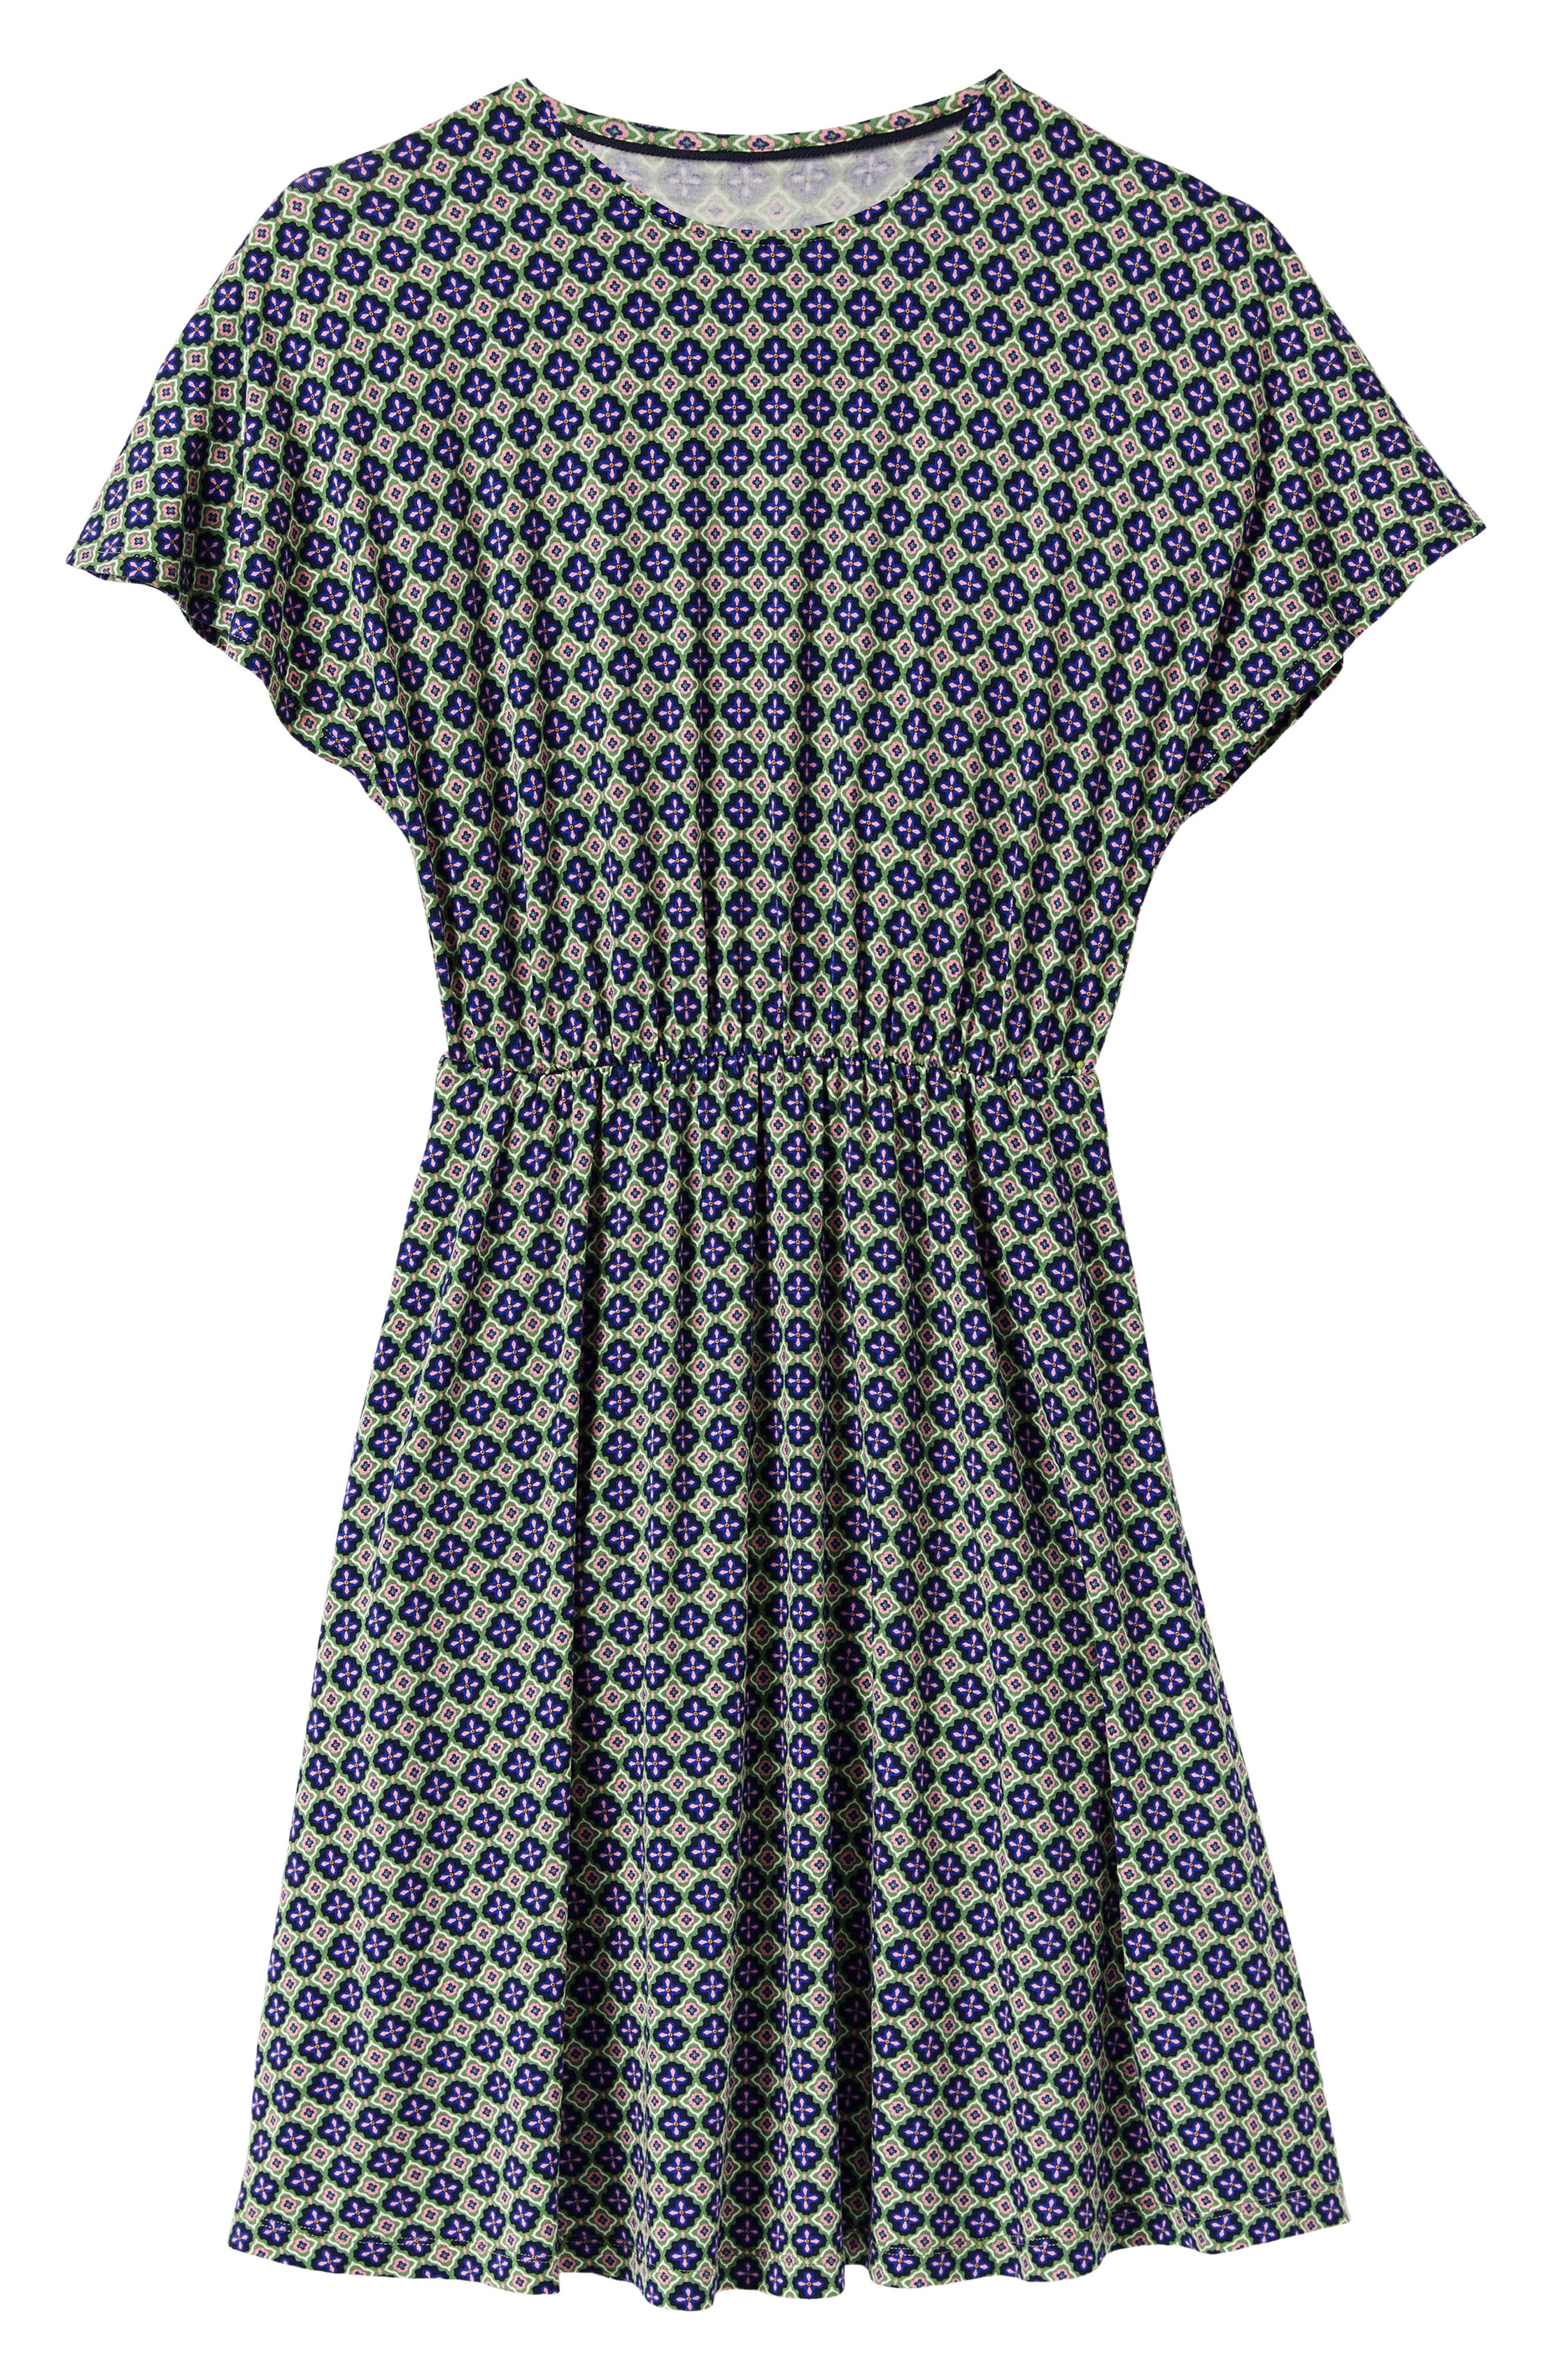 Women's Boden Clothing Sale ☀ Clearance ...